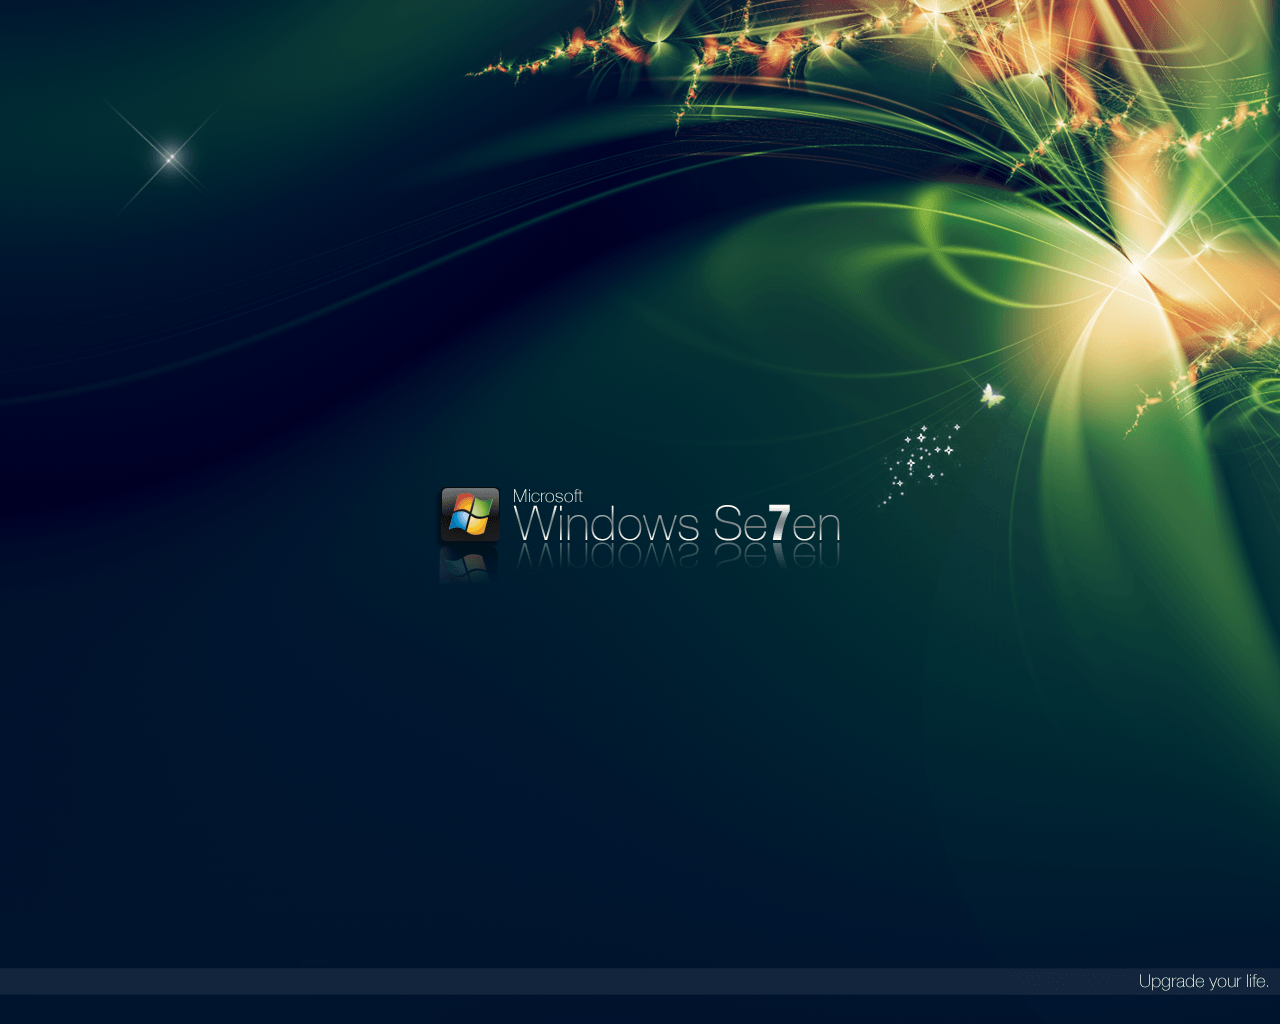 Windows Seven Wallpaper V.2 By Youness Toulouse